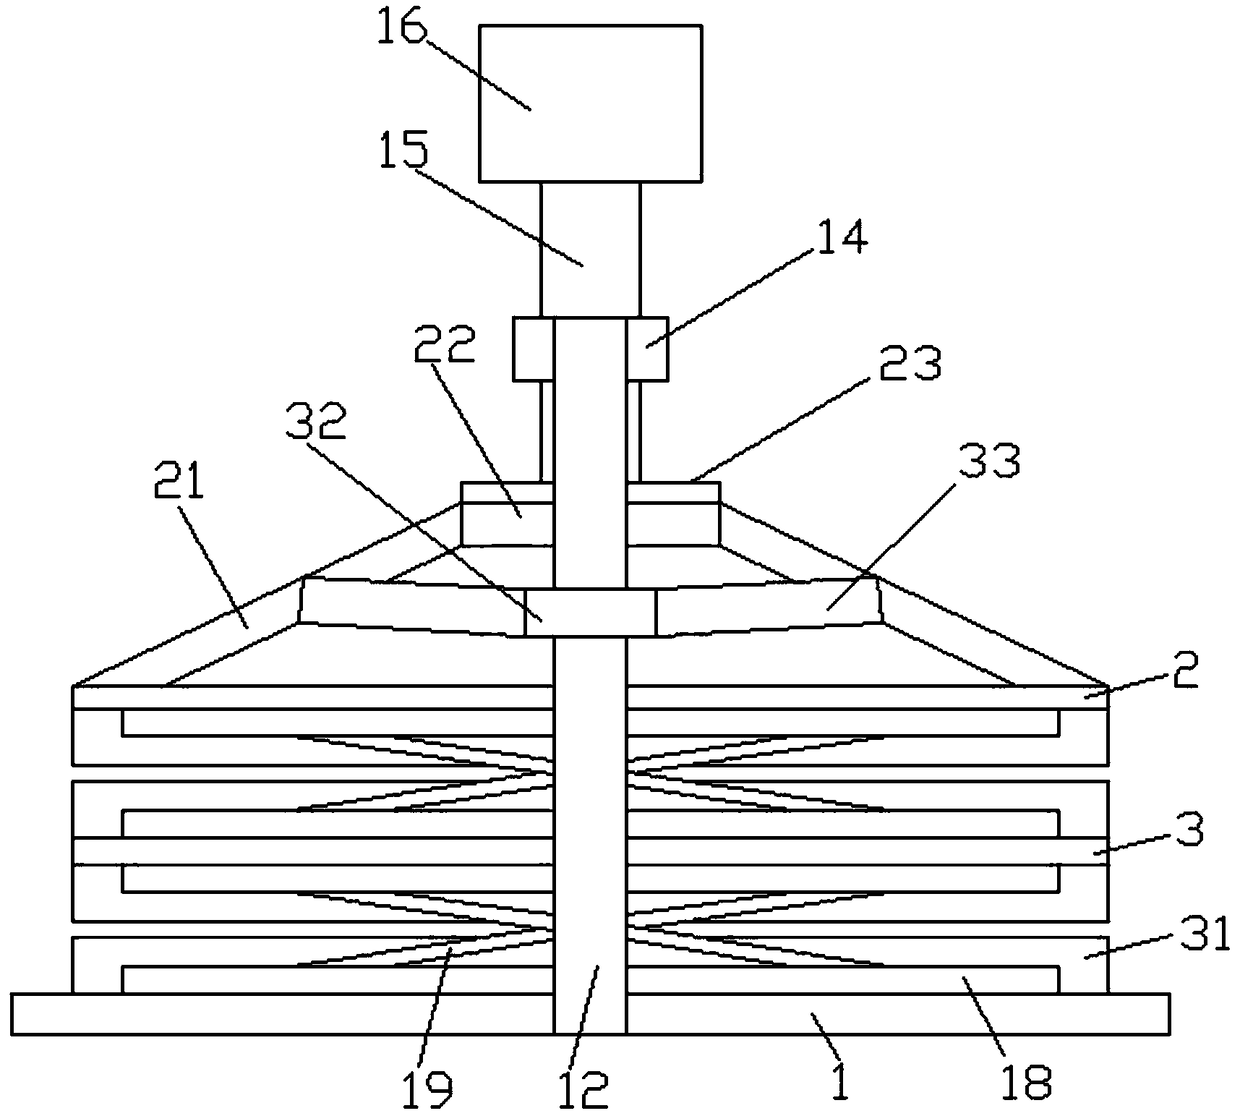 Accounting paper-quality file flattening device